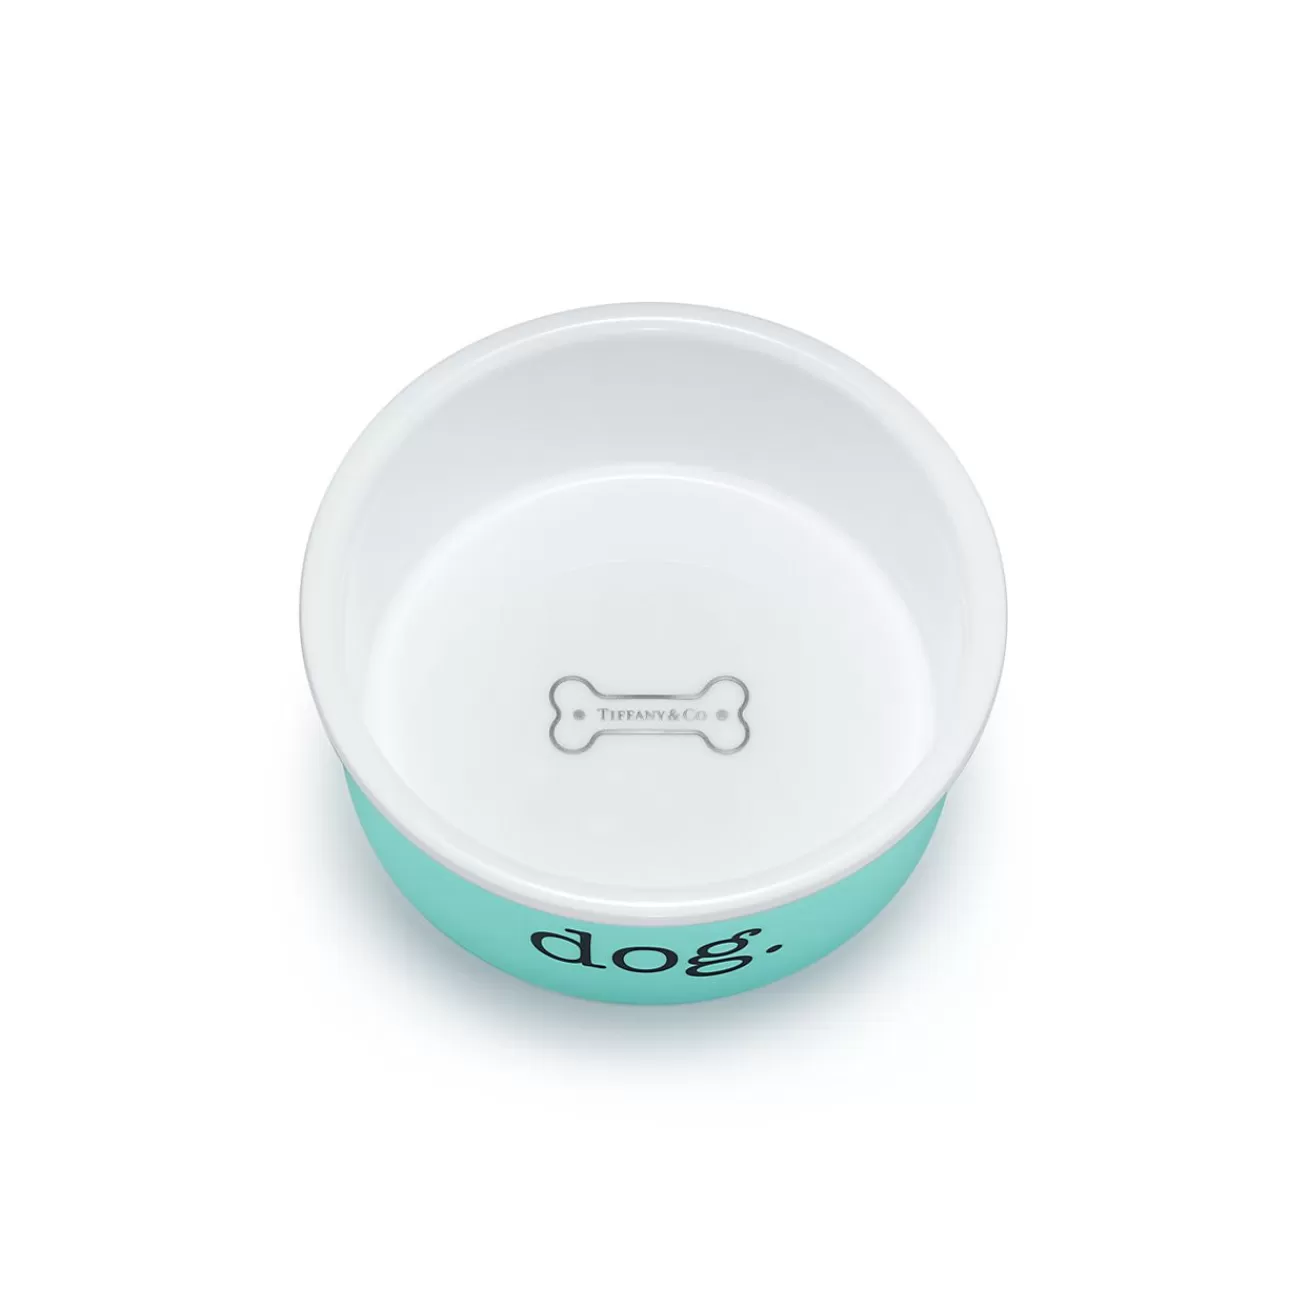 Tiffany & Co. Dog bowl in bone china, small. | ^ Tiffany Blue® Gifts | Stationery, Games & Unique Objects